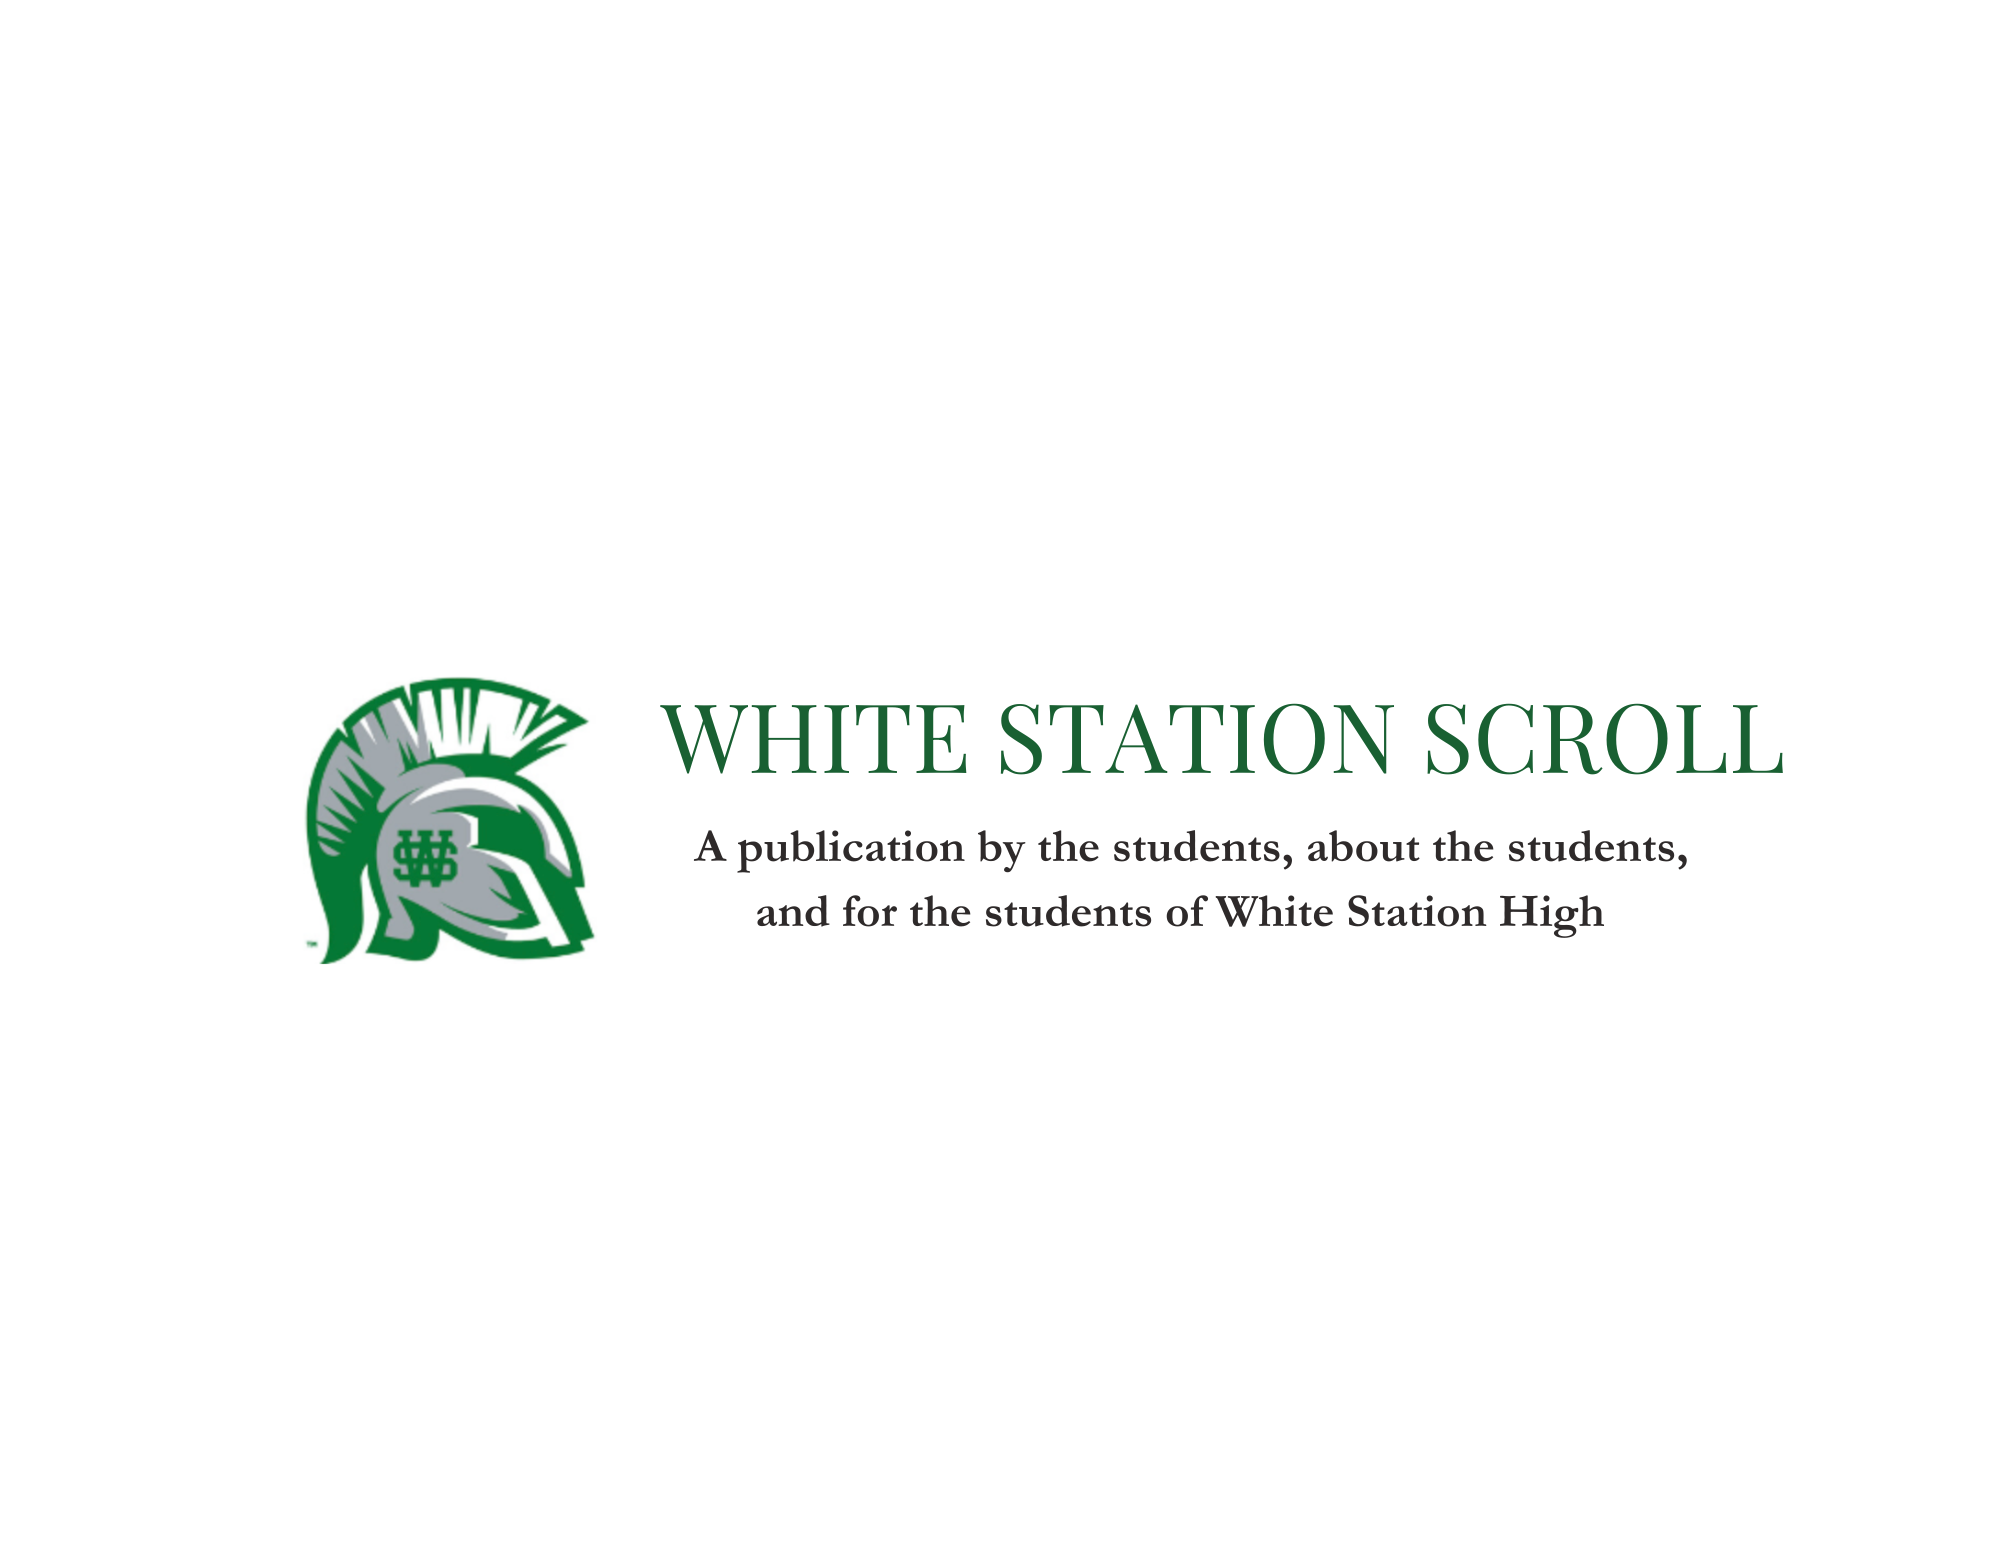 A publication by the students, about the students, and for the students of White Station High School